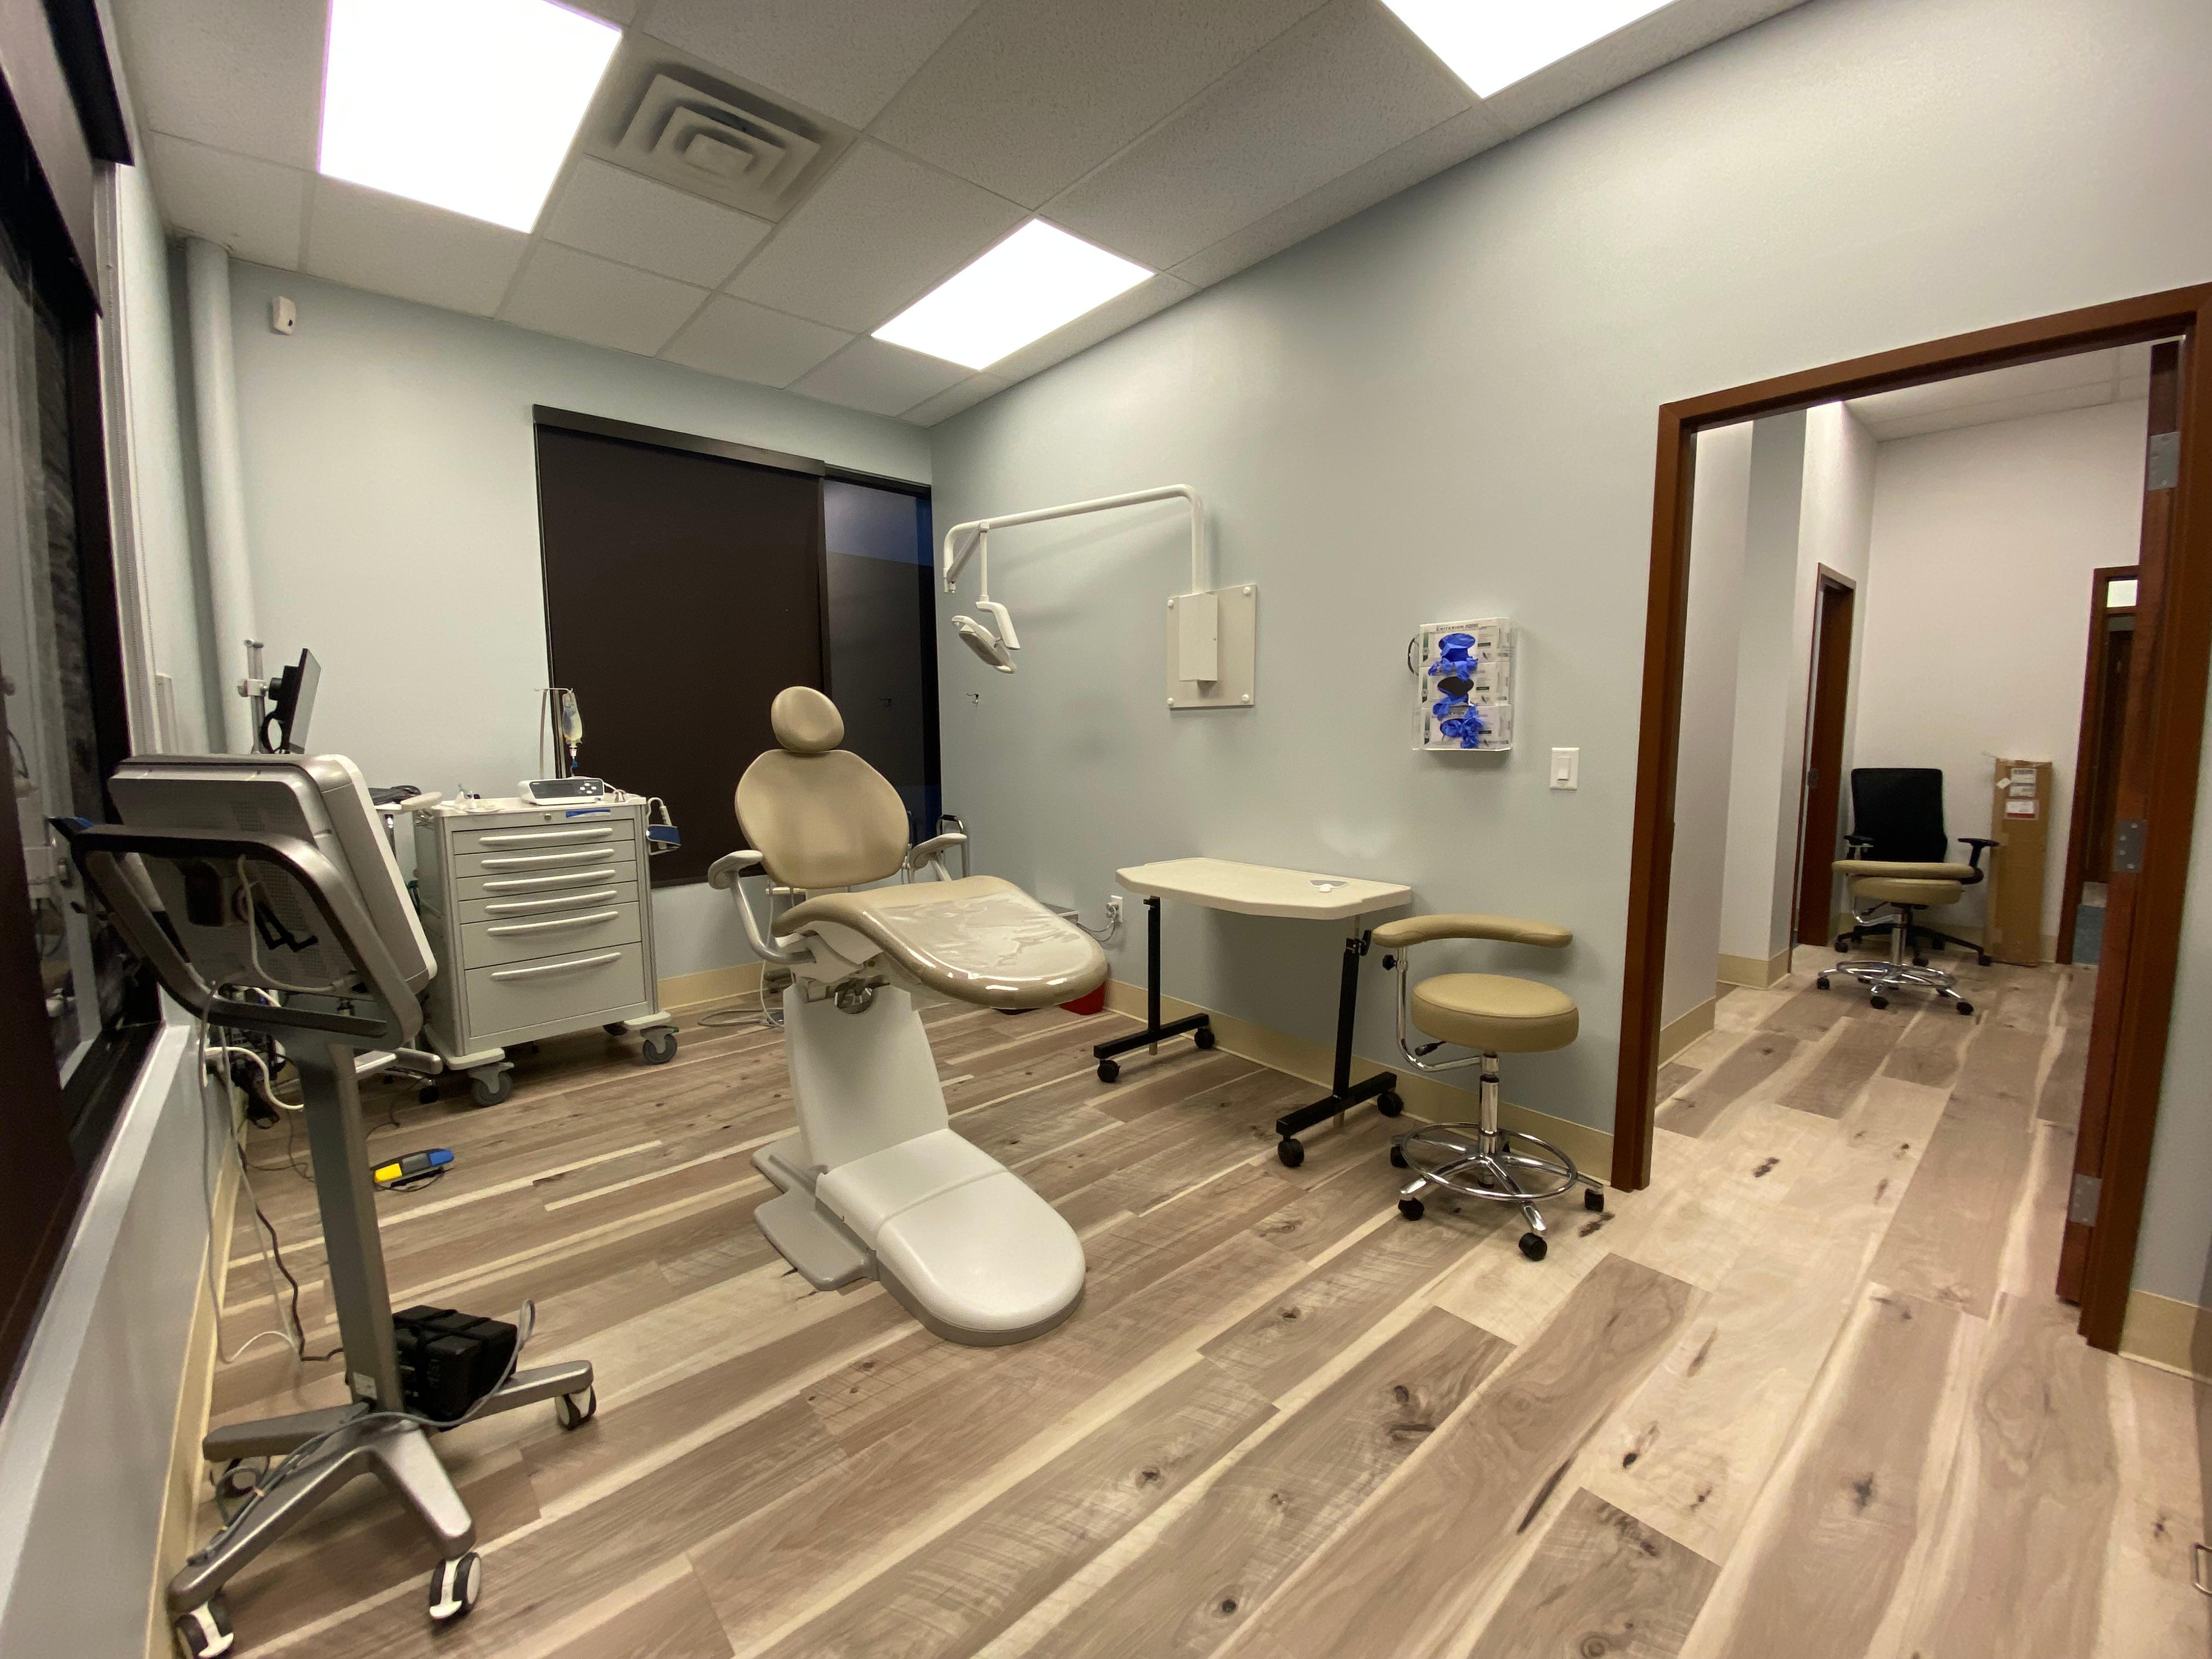 At Castle Dental & Implants, we make sure every dental visit is comfortable. Dr. Eakin and his dental team in Pasadena, Texas will thoroughly explain your treatments so there won't be any surprises.